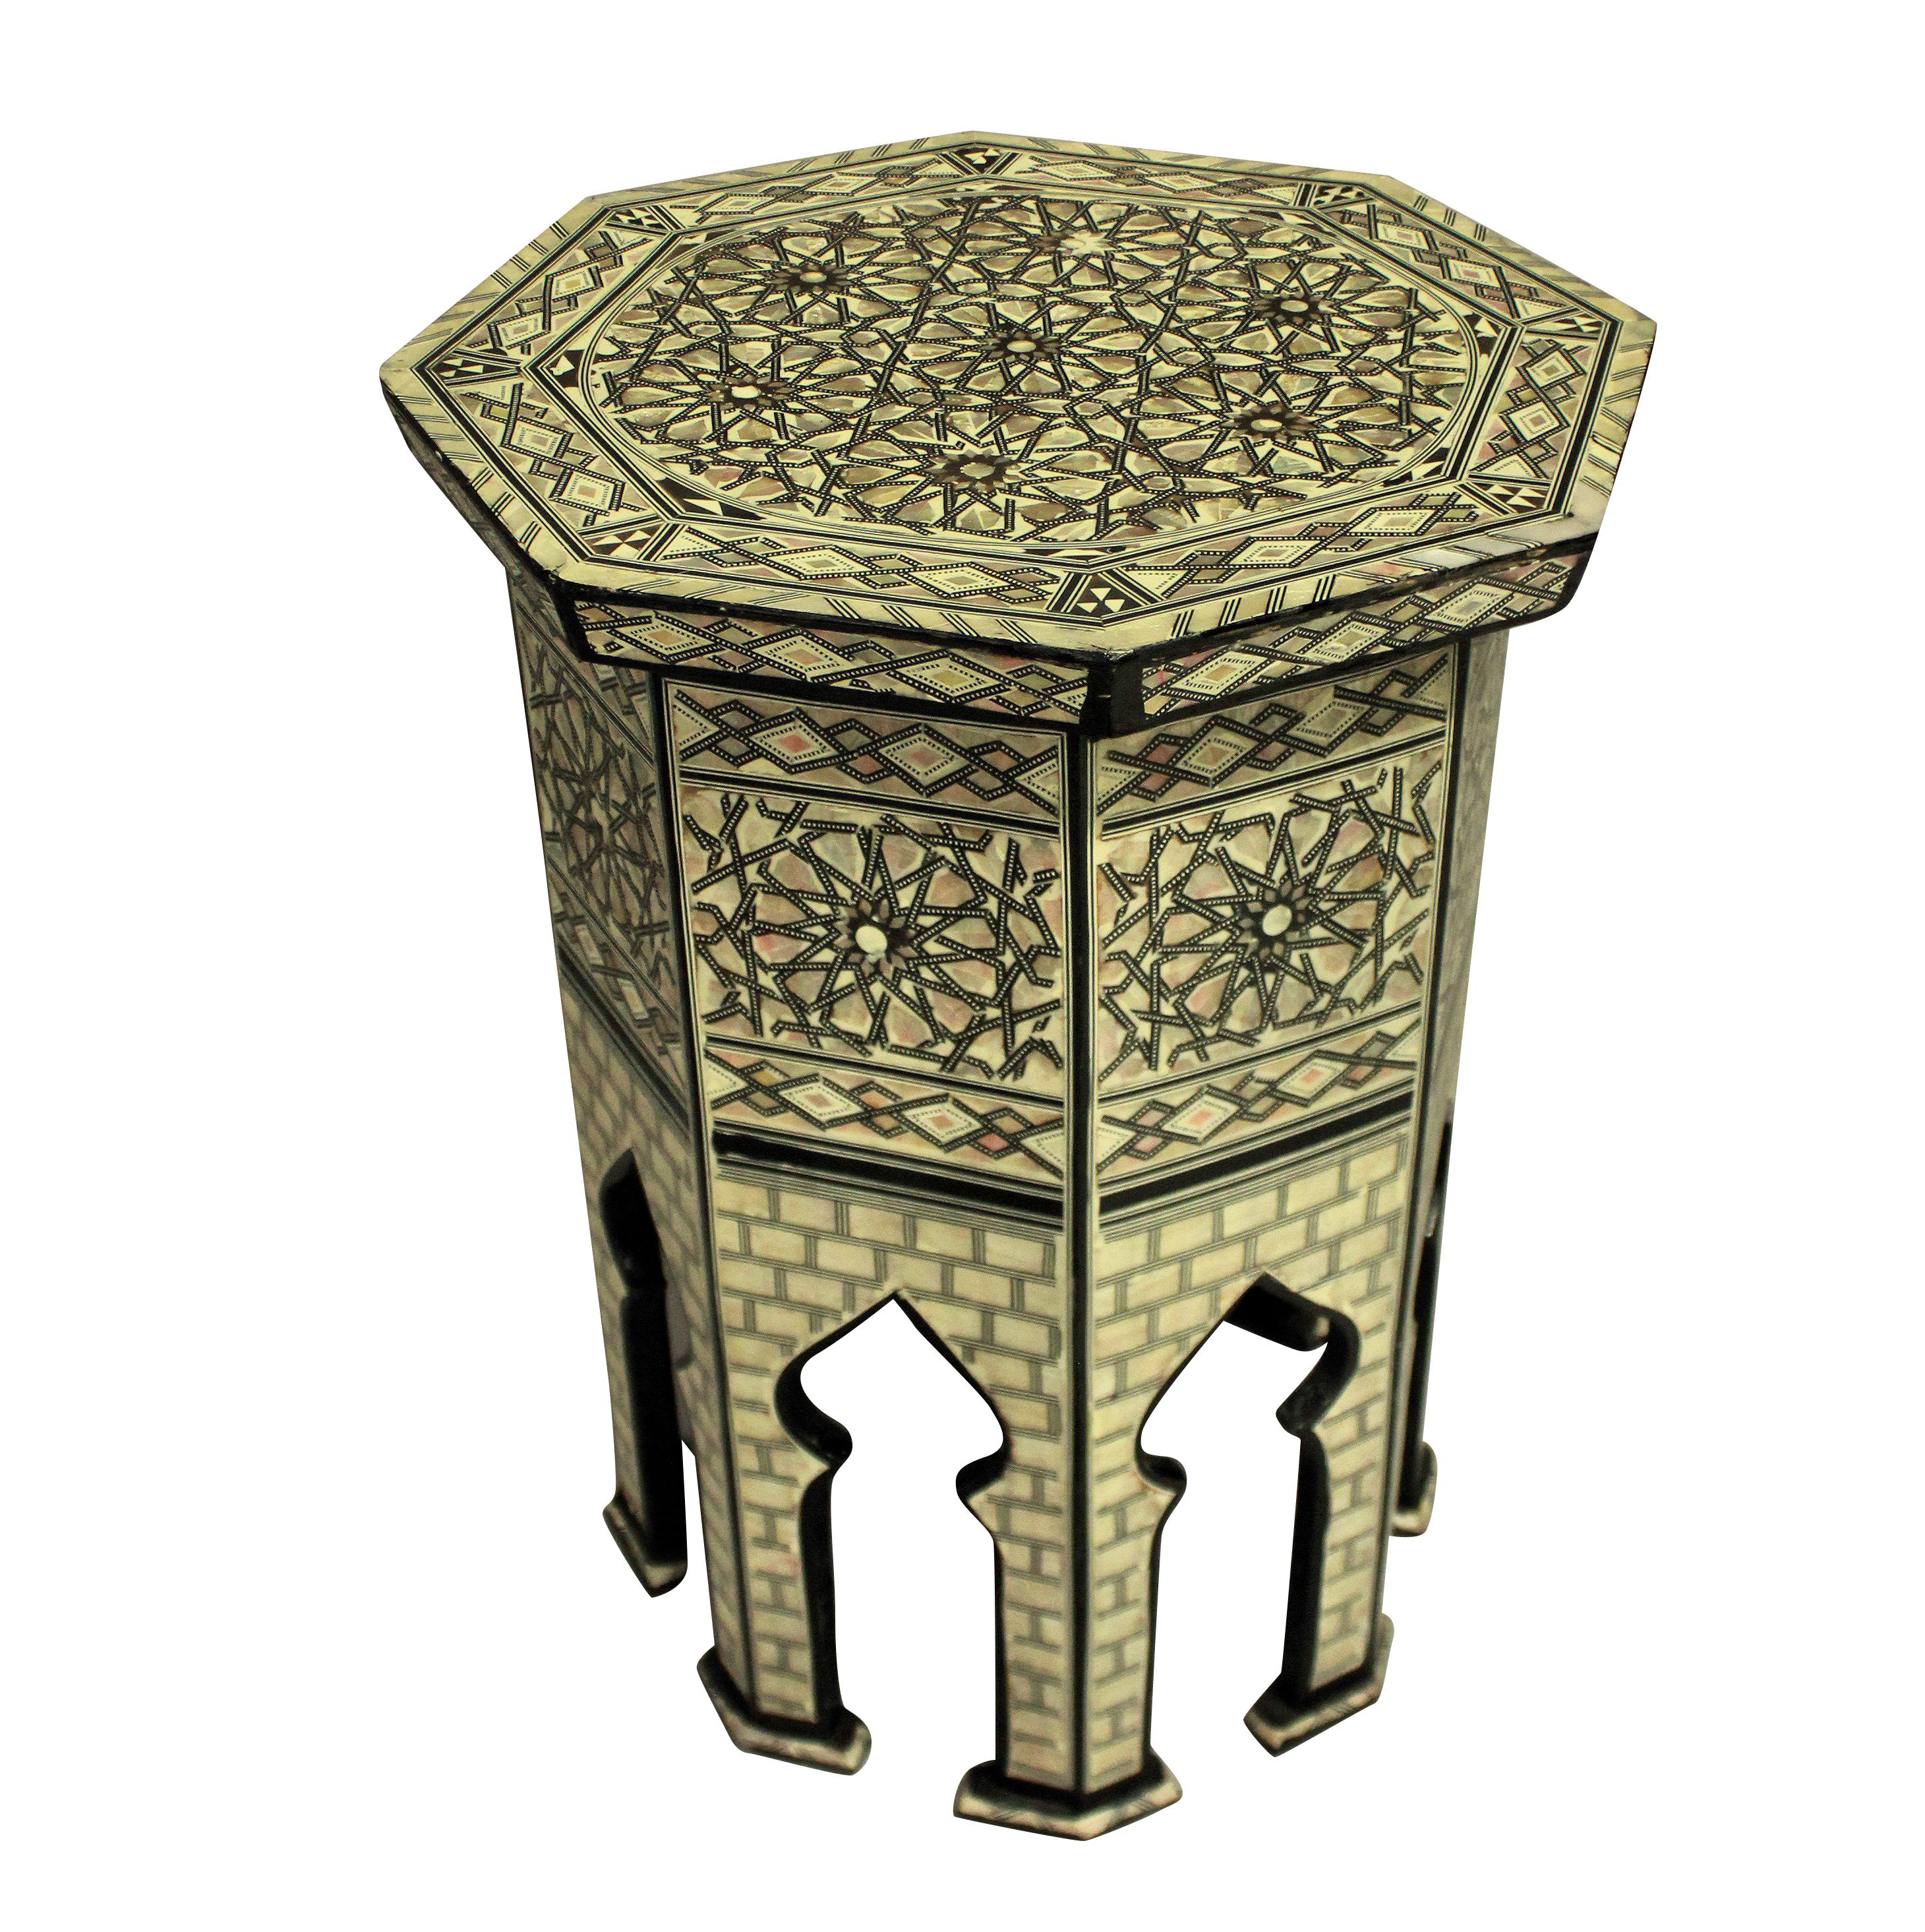 A fine Middle Eastern side table inlaid with ebonized hardwood, bone and mother of pearl in geometric designs.